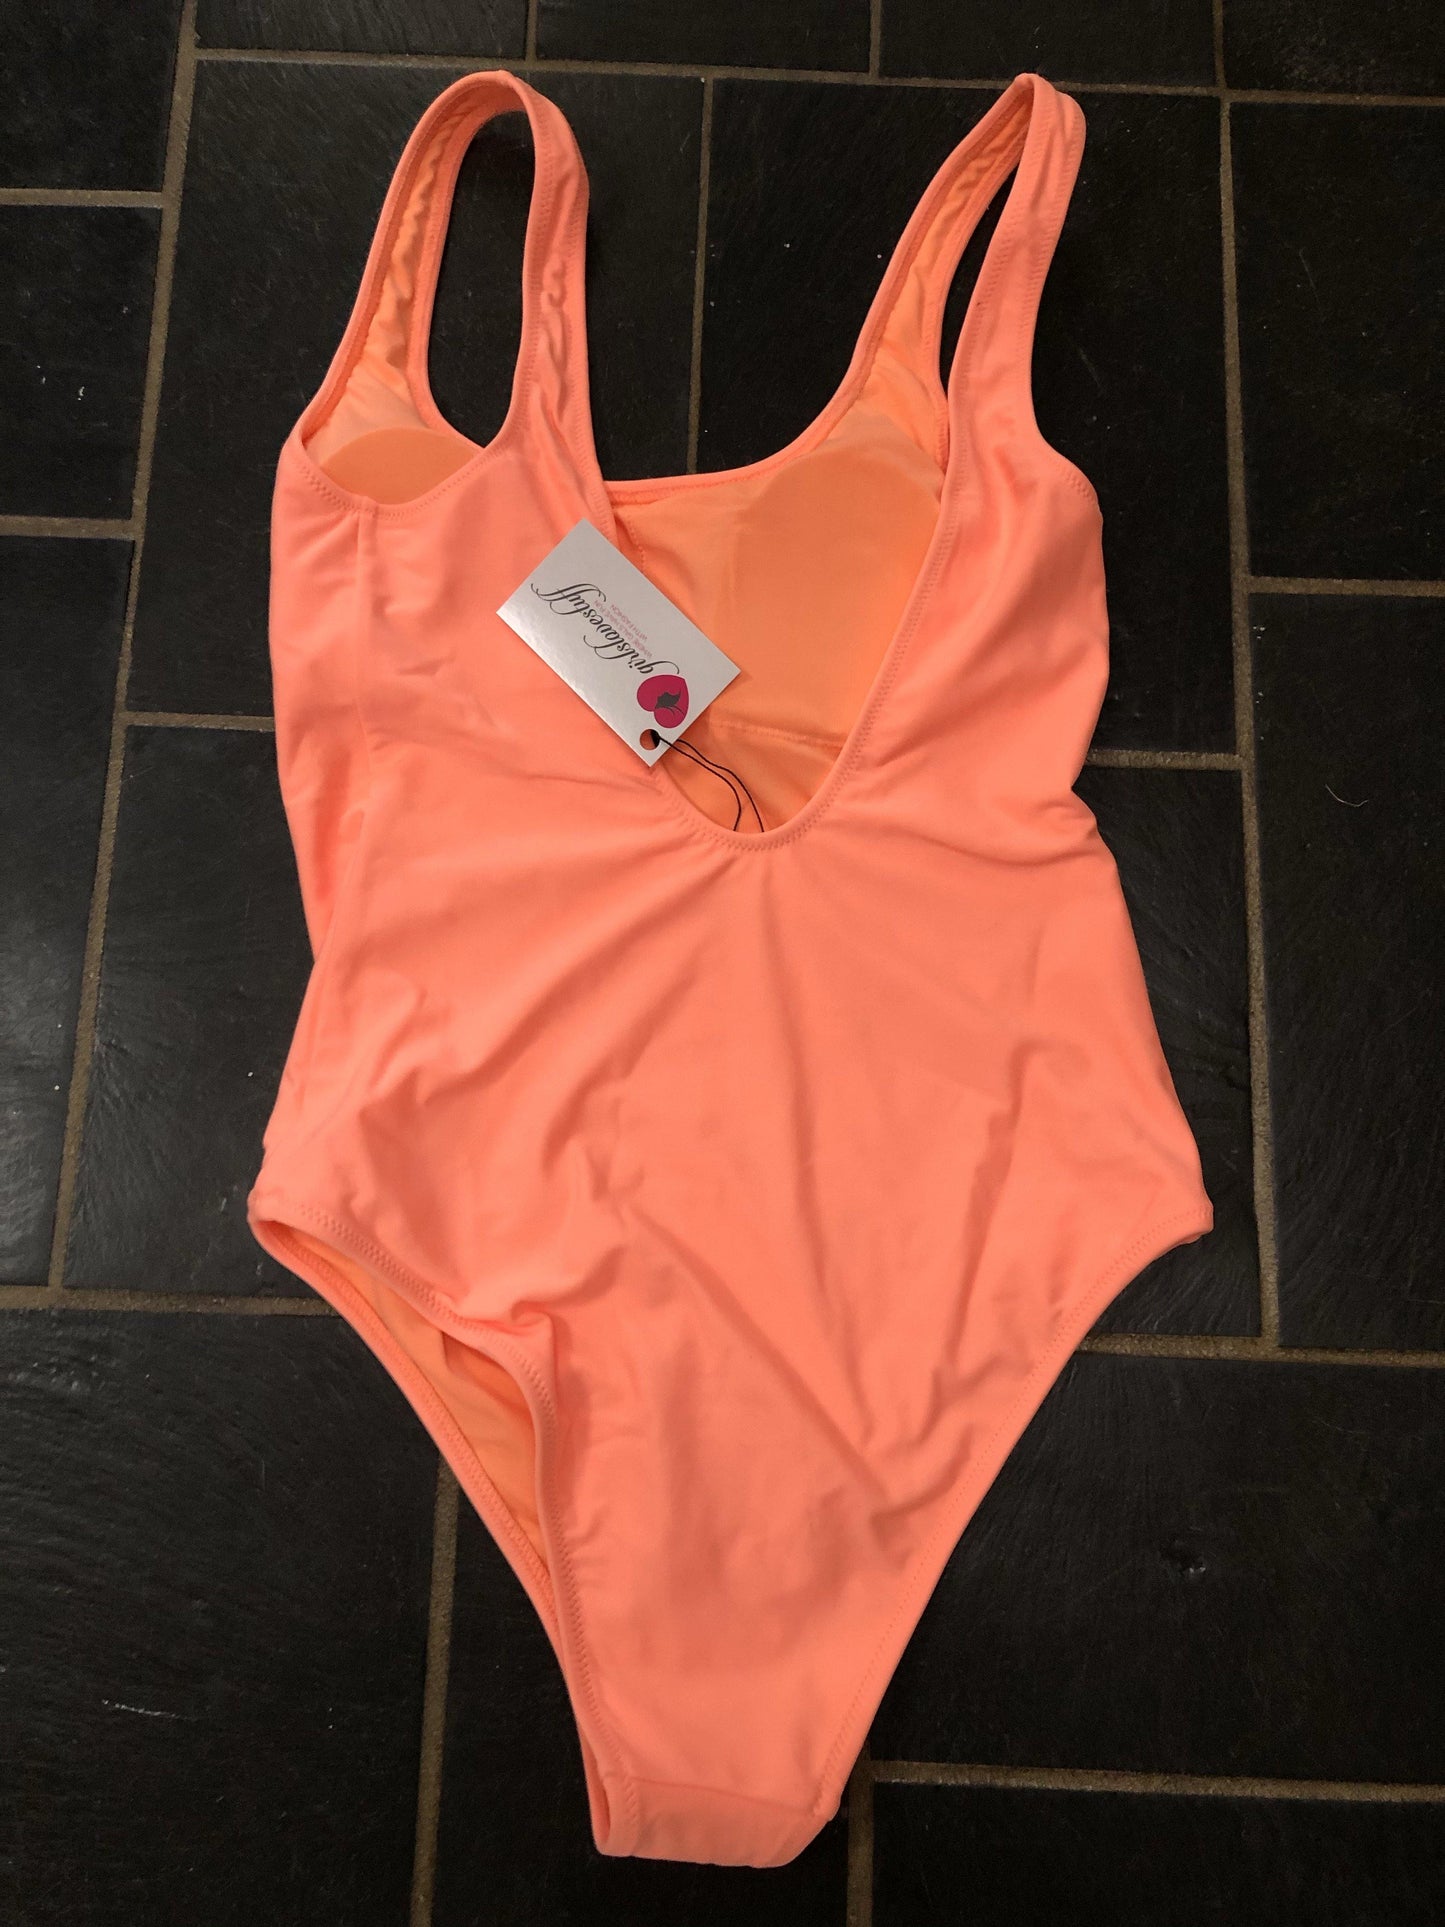 Aerie "Gelato is My Motto" Cheeky One Piece Swimsuit - GMBU Apparel